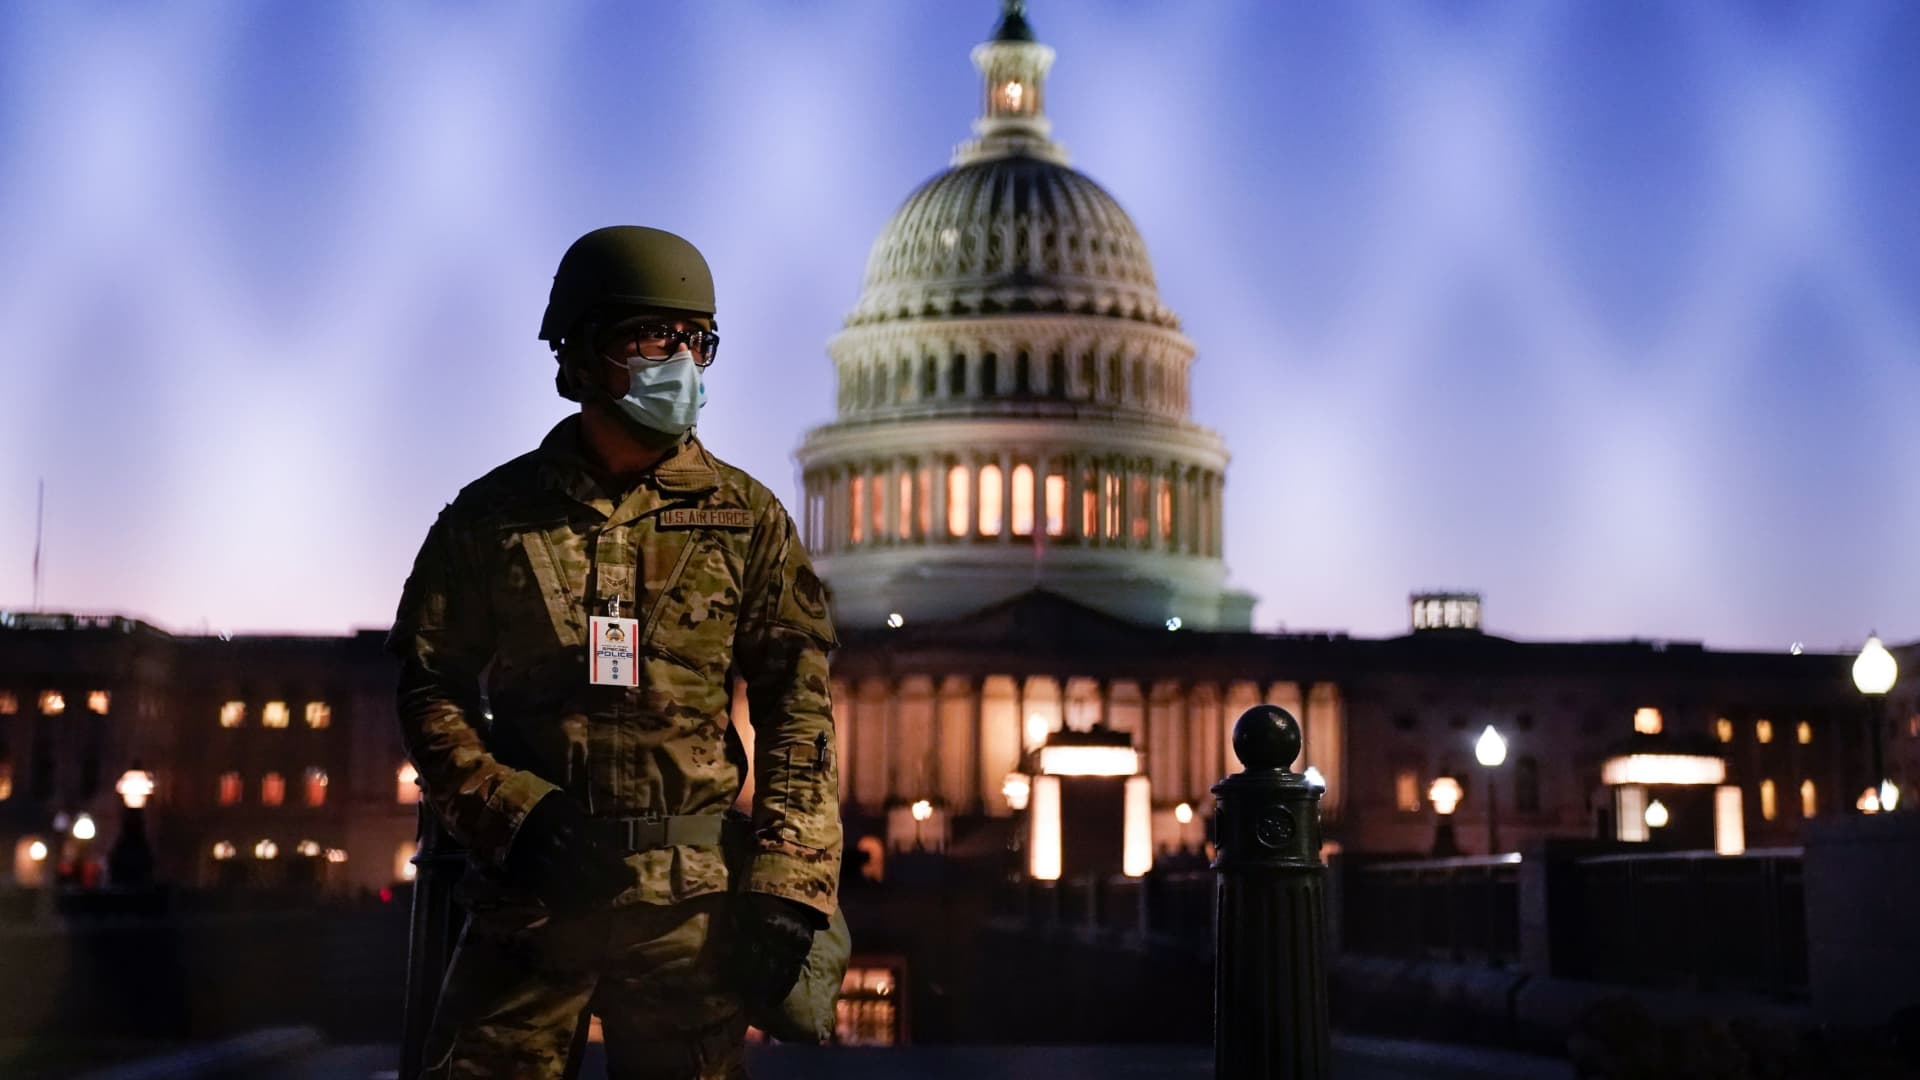 Members of the National Guard gather at the U.S. Capitol as the House of Representatives prepares to begin the voting process on a resolution demanding U.S. Vice President Pence and the cabinet remove President Trump from office, in Washington, January 12, 2021.